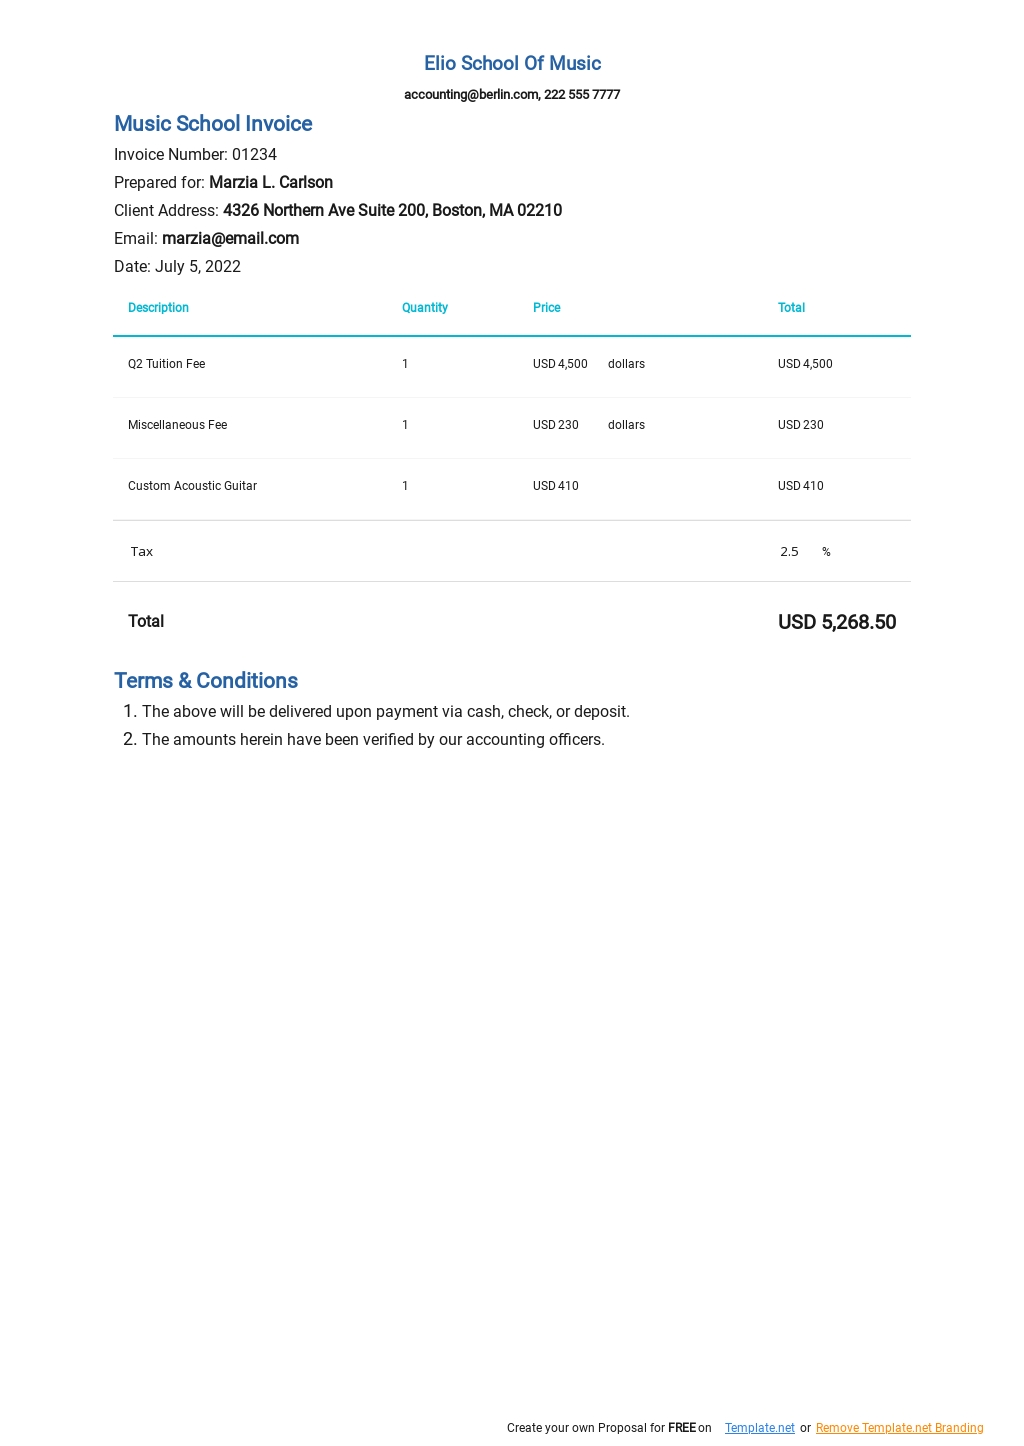 Music School Invoice Template - Google Docs, Google Sheets, Excel, Word